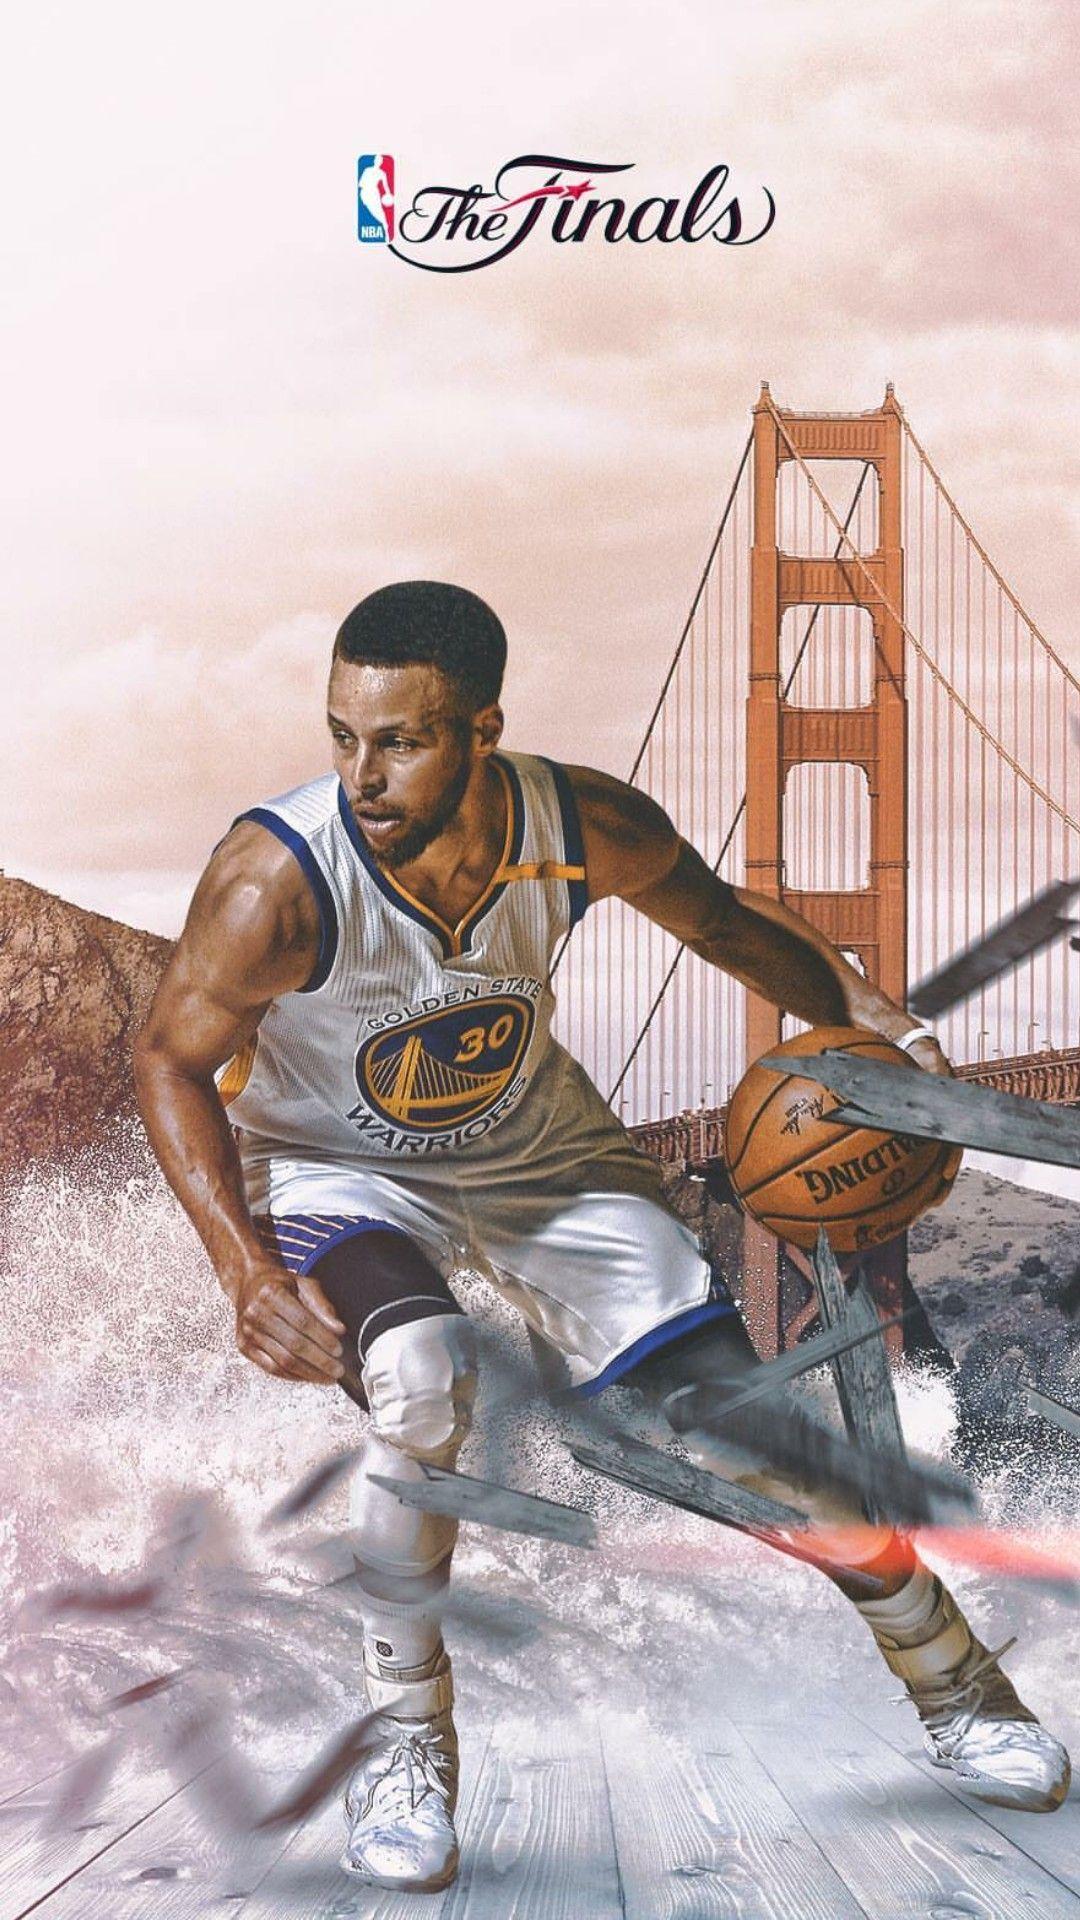 Stephen curry wallpaper. BASKETBALL. Stephen Curry, Stephen curry